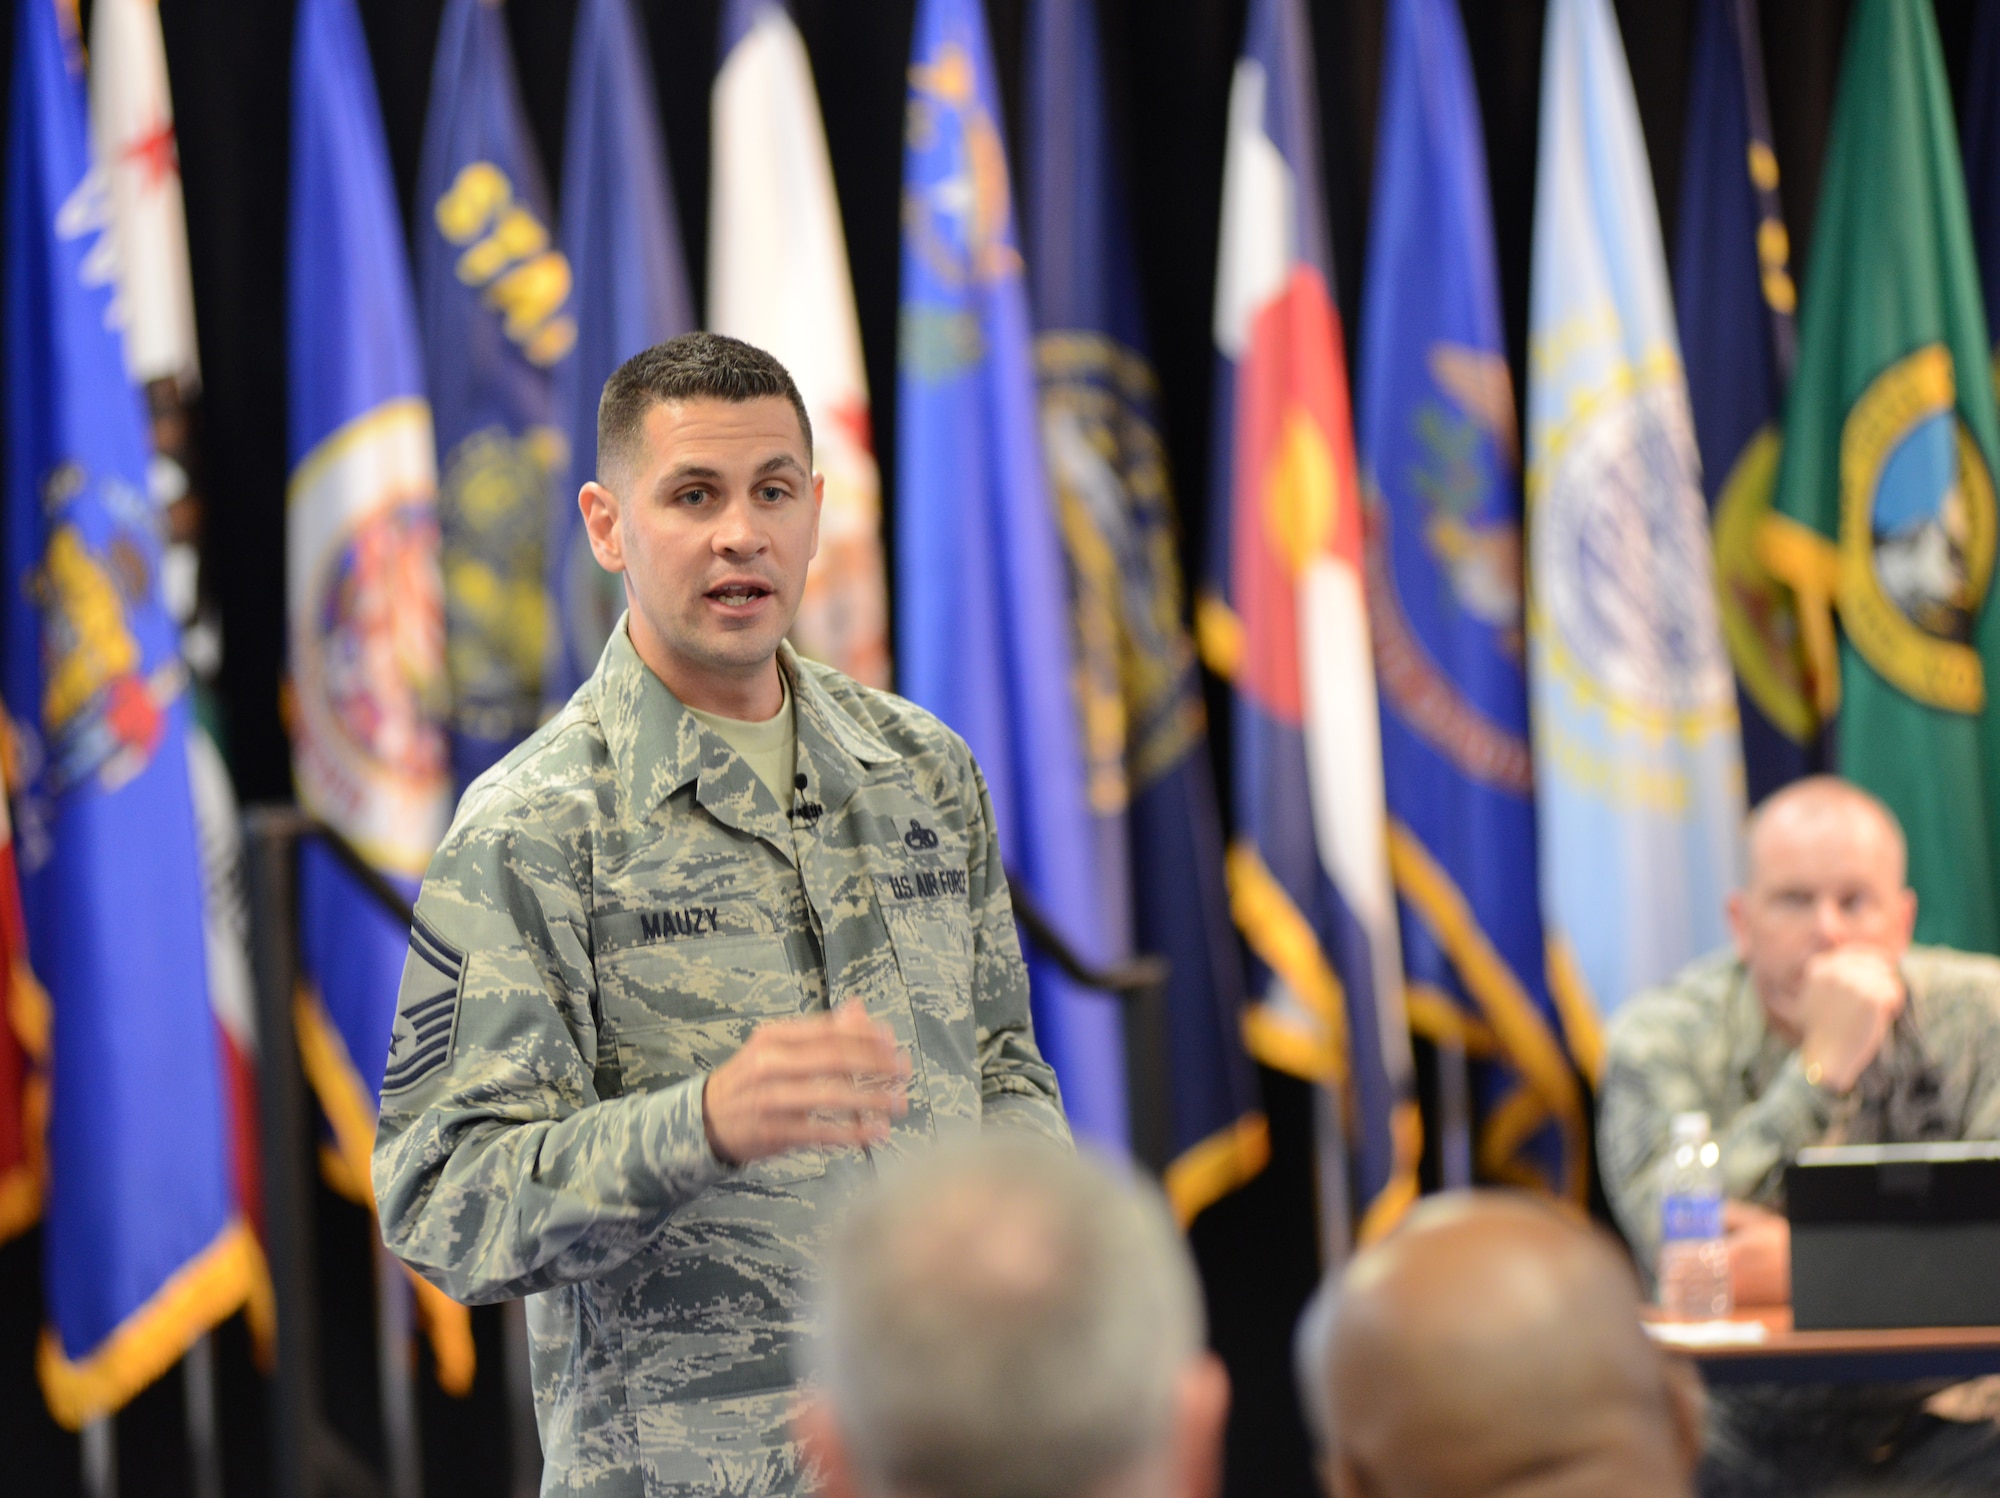 Senior Master Sgt. Darin Mauzy, Senior Enlisted Management Office supervisor, addresses the 2014 Command Chief’s Huddle, held at Volk Field Combat Readiness Training Center, Wis., May 11, 2014. Mauzy outlined the office’s mission to ensure that senior enlisted leaders in the Air National Guard have equivalent access to development opportunities as the active component, in order to ensure the Guard’s voice is heard throughout the Air Force. (U.S. Air National Guard photo by Senior Airman John E. Hillier III)